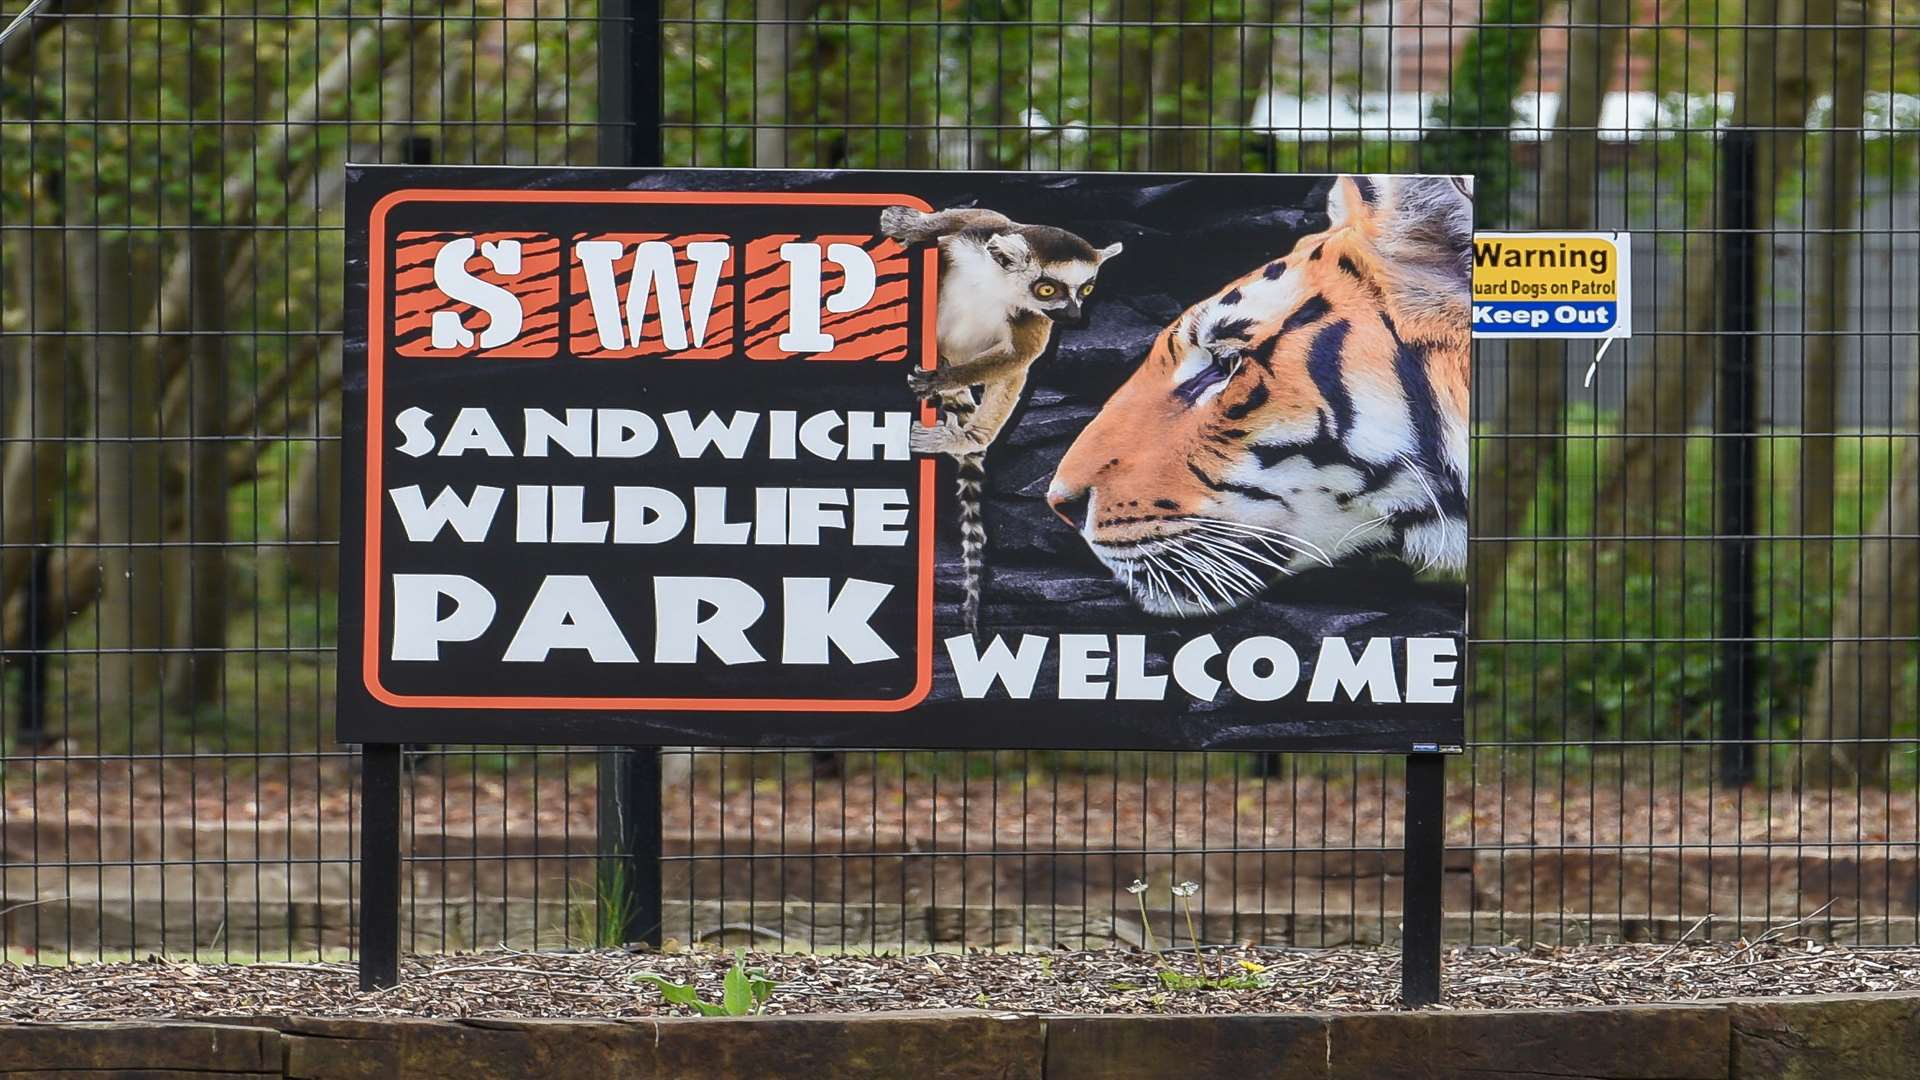 The site is being opened up as a sister site to Wingham Wildlife Park